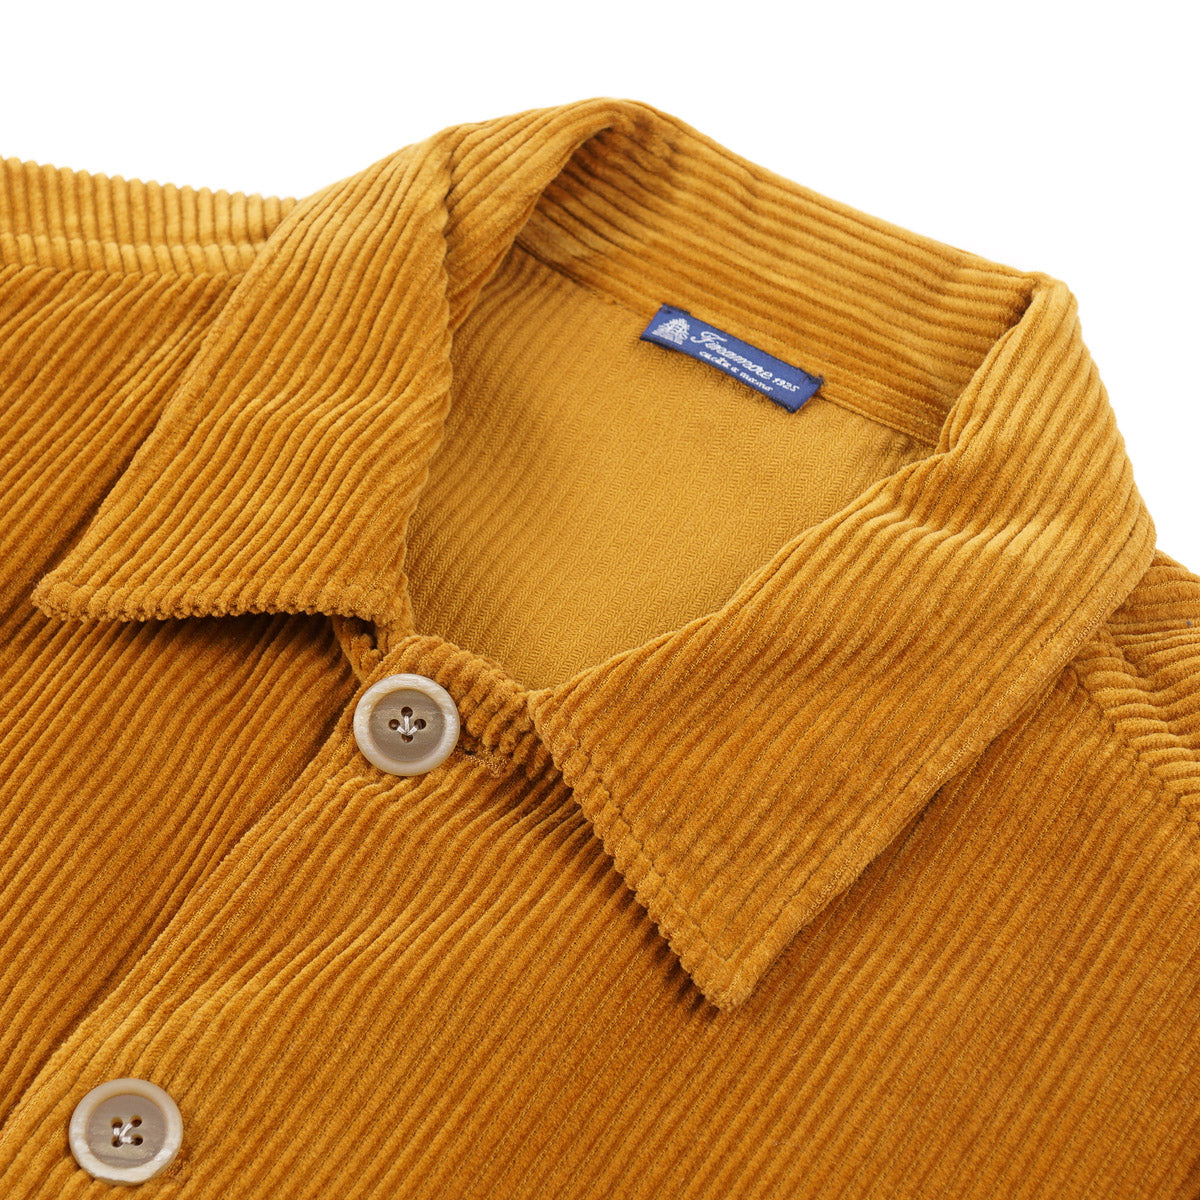 Finamore Relaxed-Fit Casual Corduroy Jacket - Top Shelf Apparel